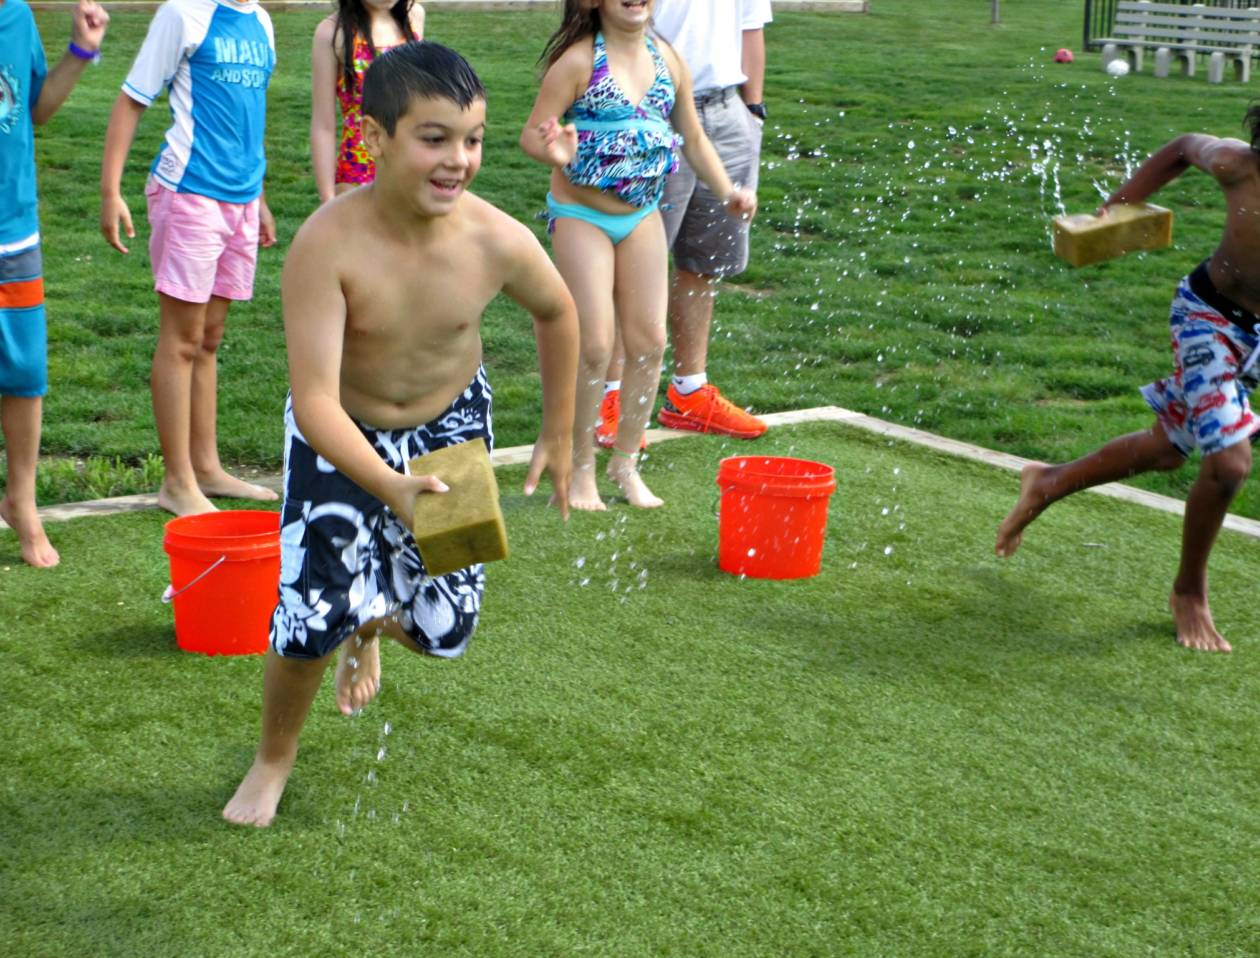 Kids playing tag with wet sponges